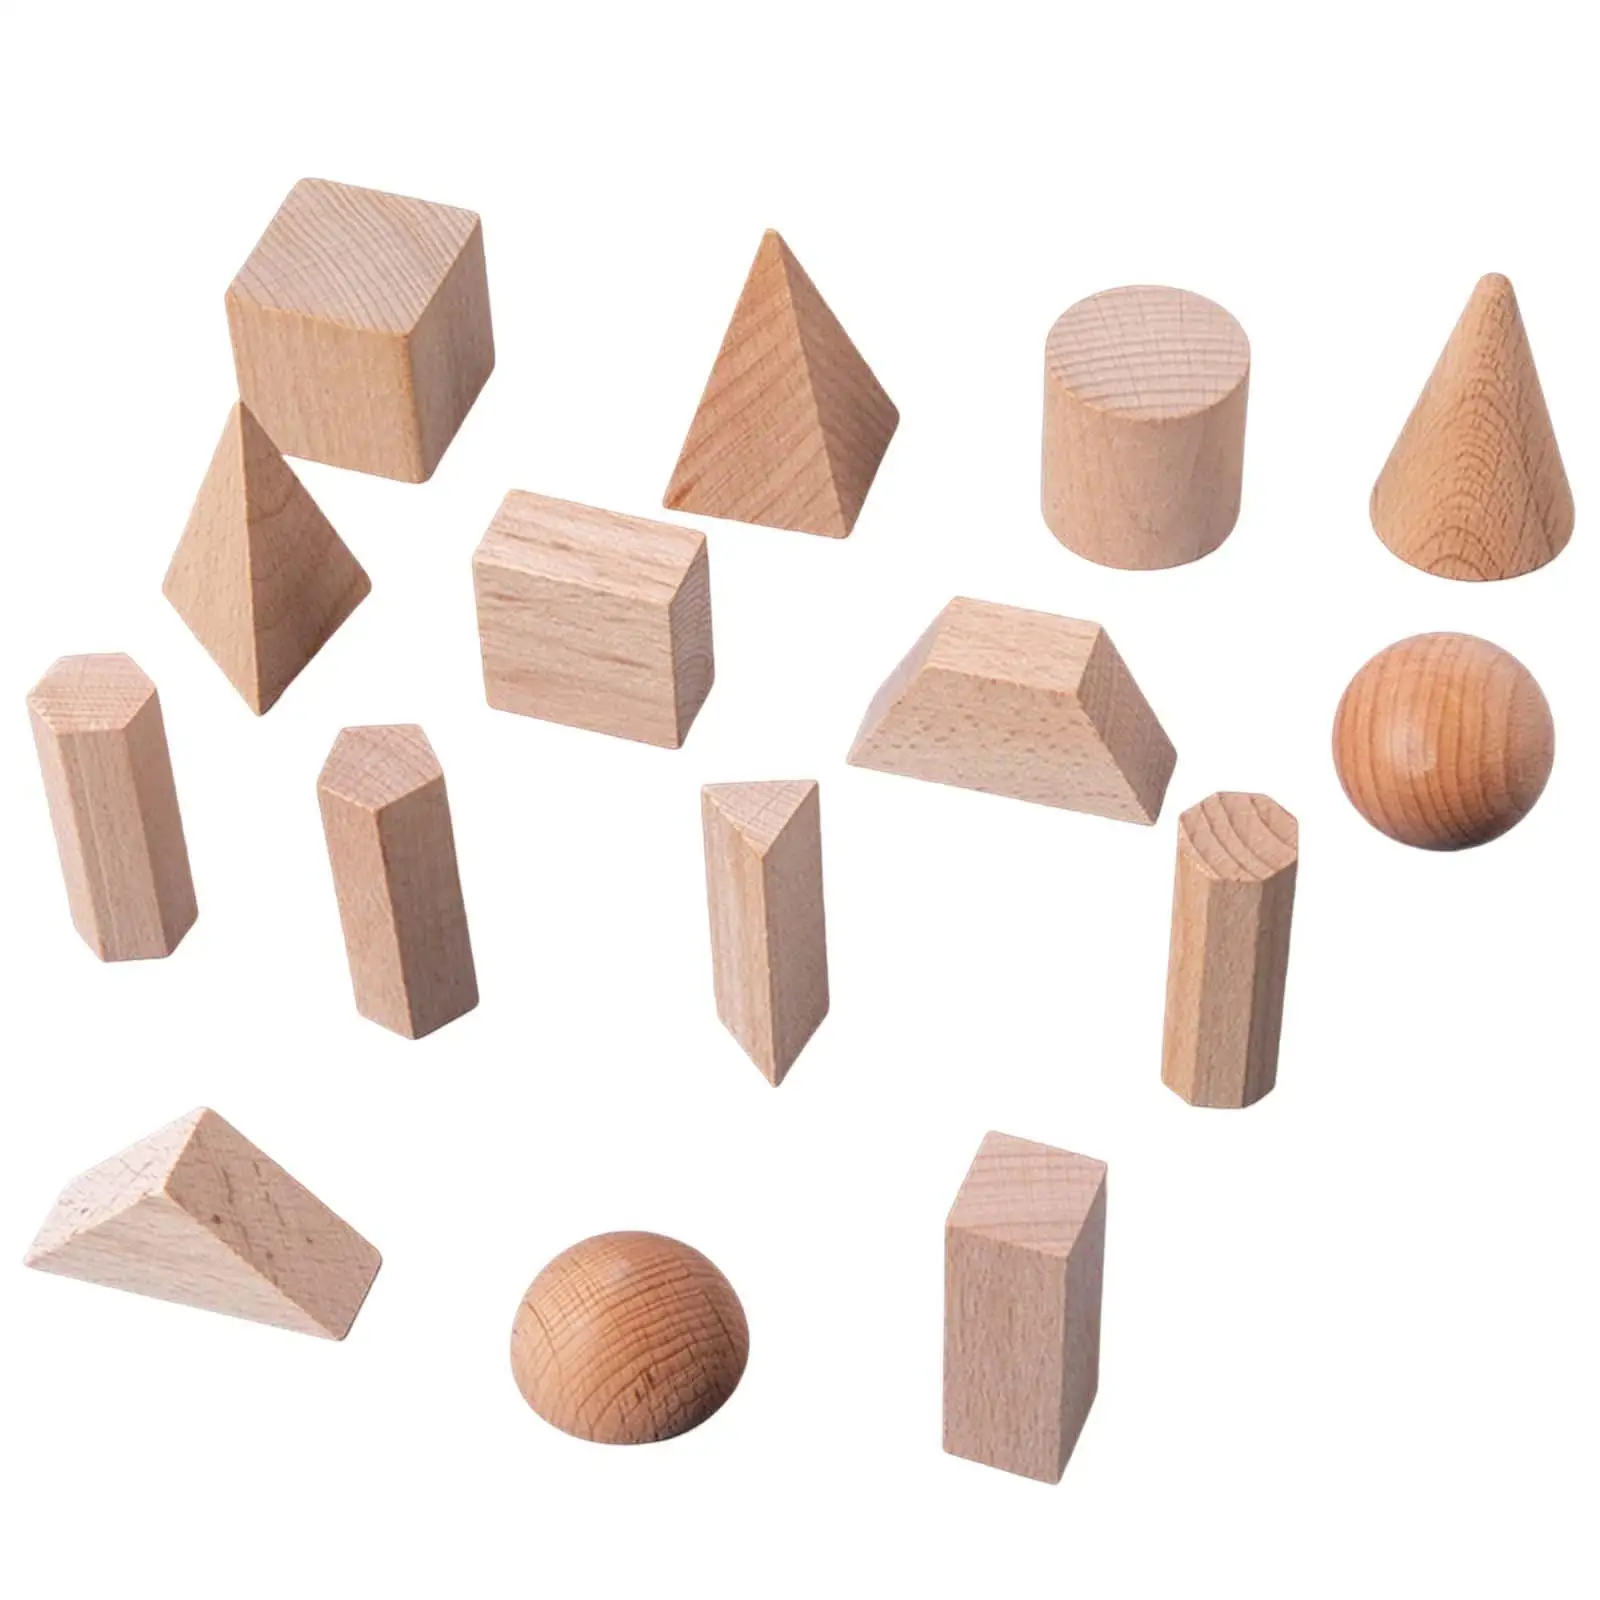 15 Pieces Wood Geometric Solids Educational Toy 3D Shapes Montessori Toys Stacking Toy for Babies Toddler Ages 2+ Kids